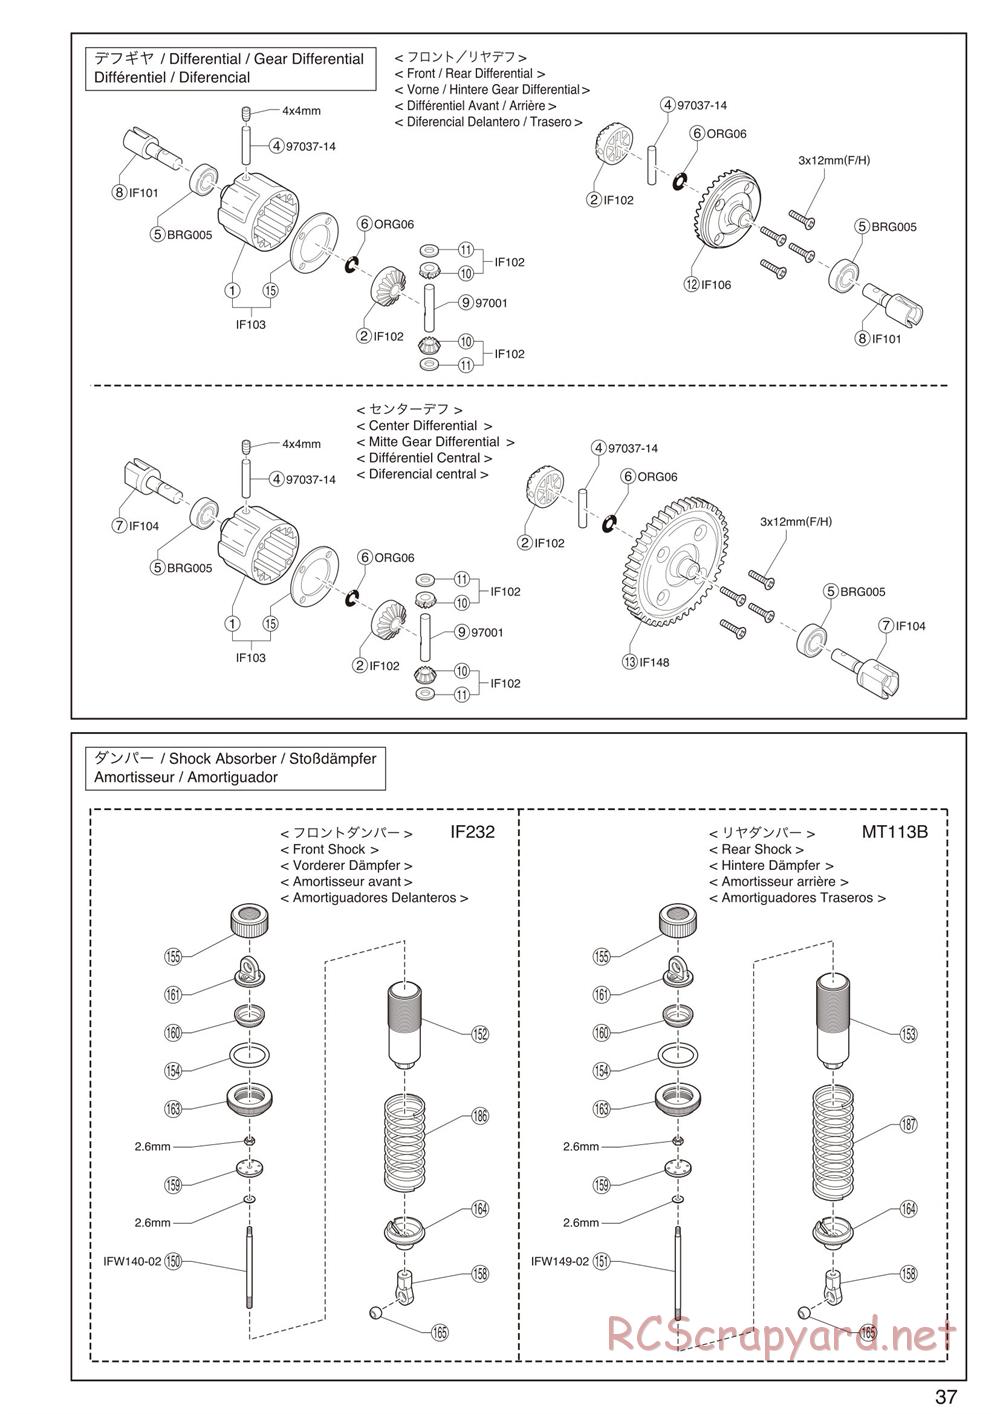 Kyosho - Inferno Neo 2.0 - Exploded Views - Page 6